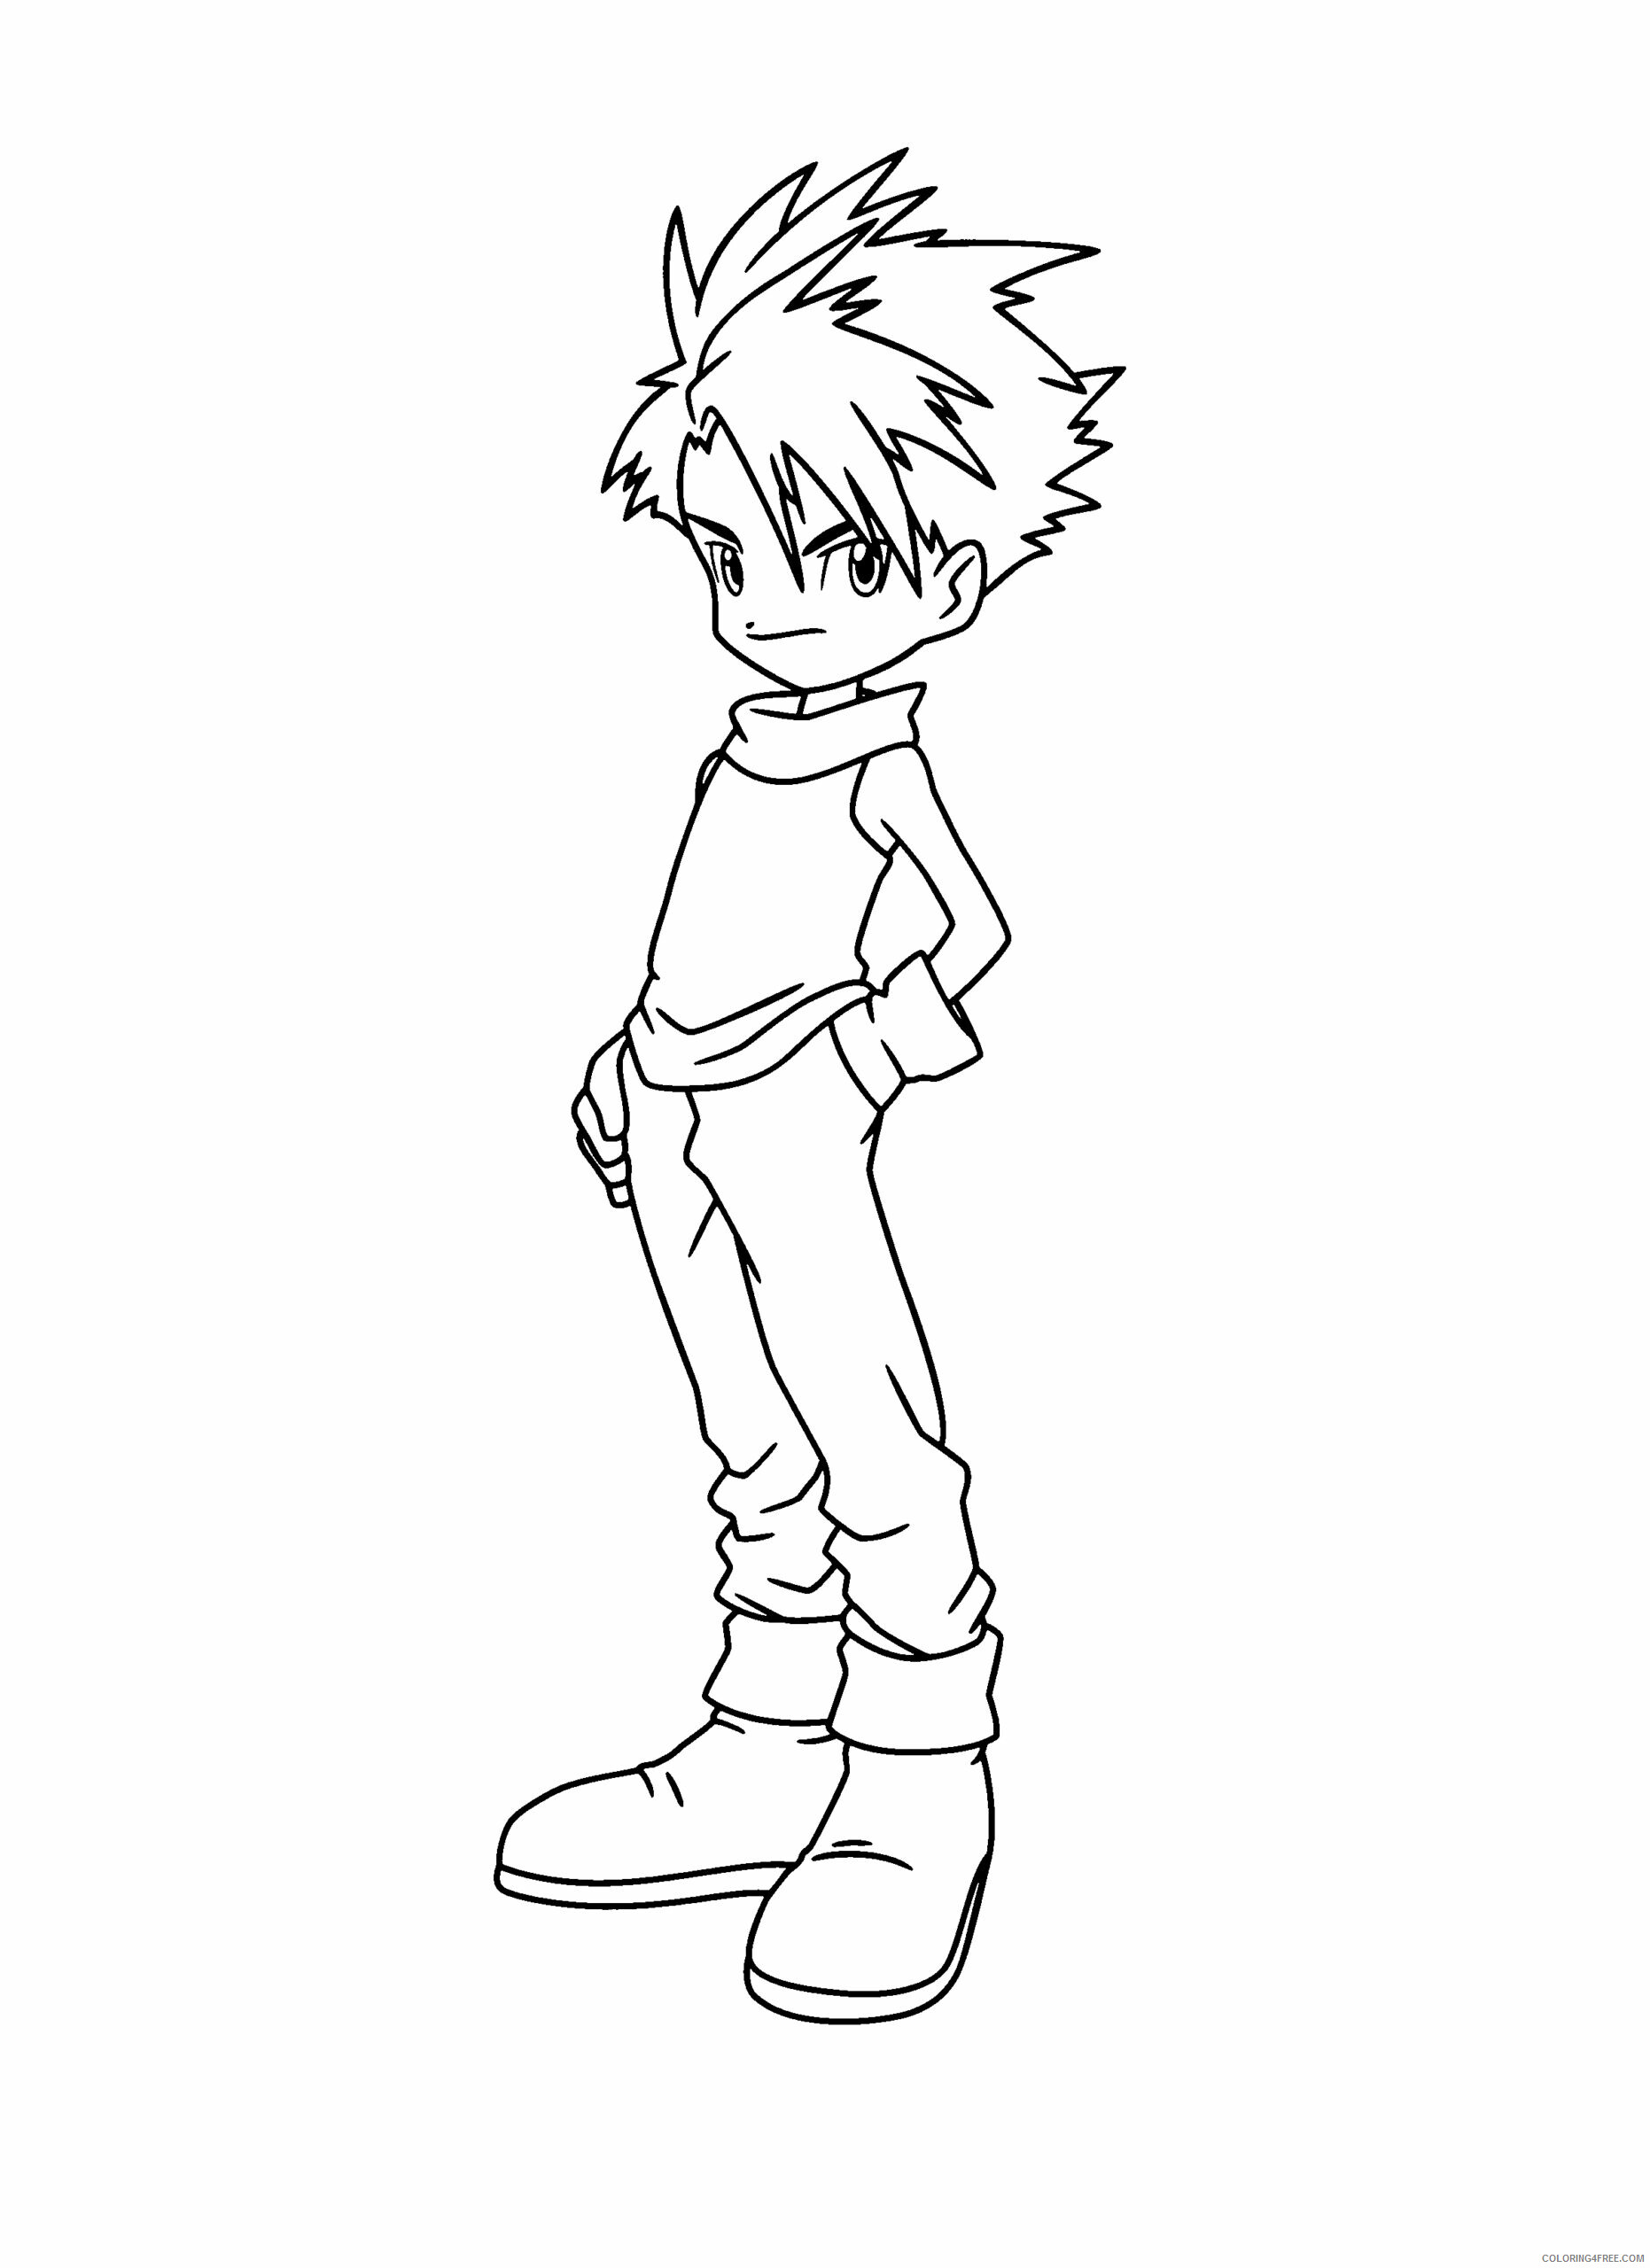 Digimon Printable Coloring Pages Anime digimon 4nrzI 2021 0156 Coloring4free